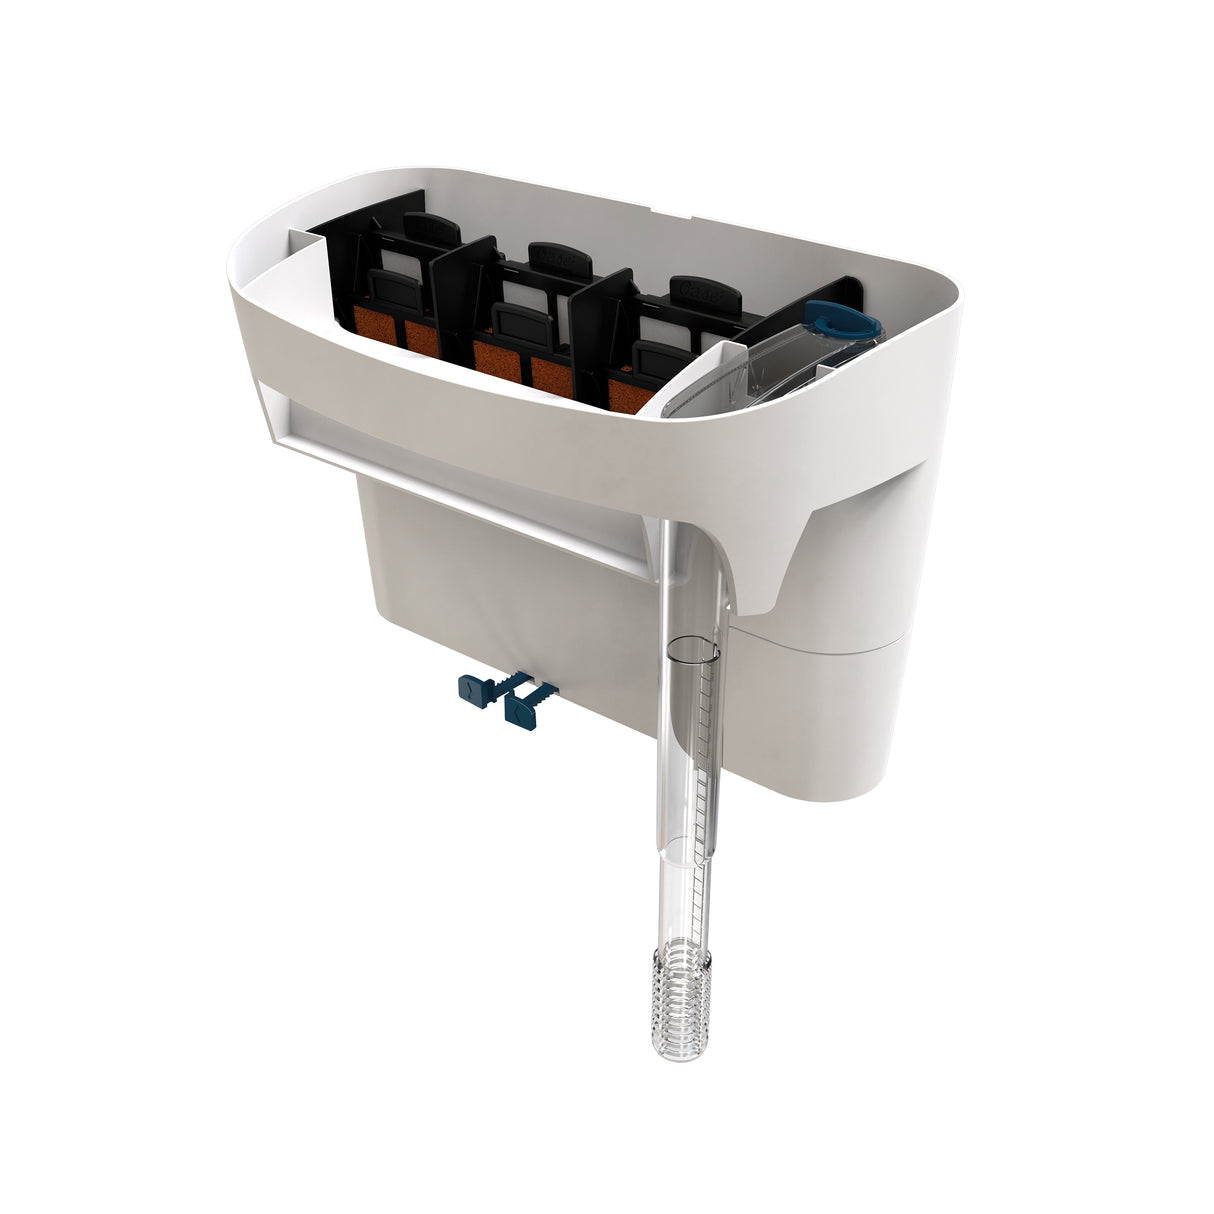 OASE BioStyle Thermo 50 White features multi-stage filtration